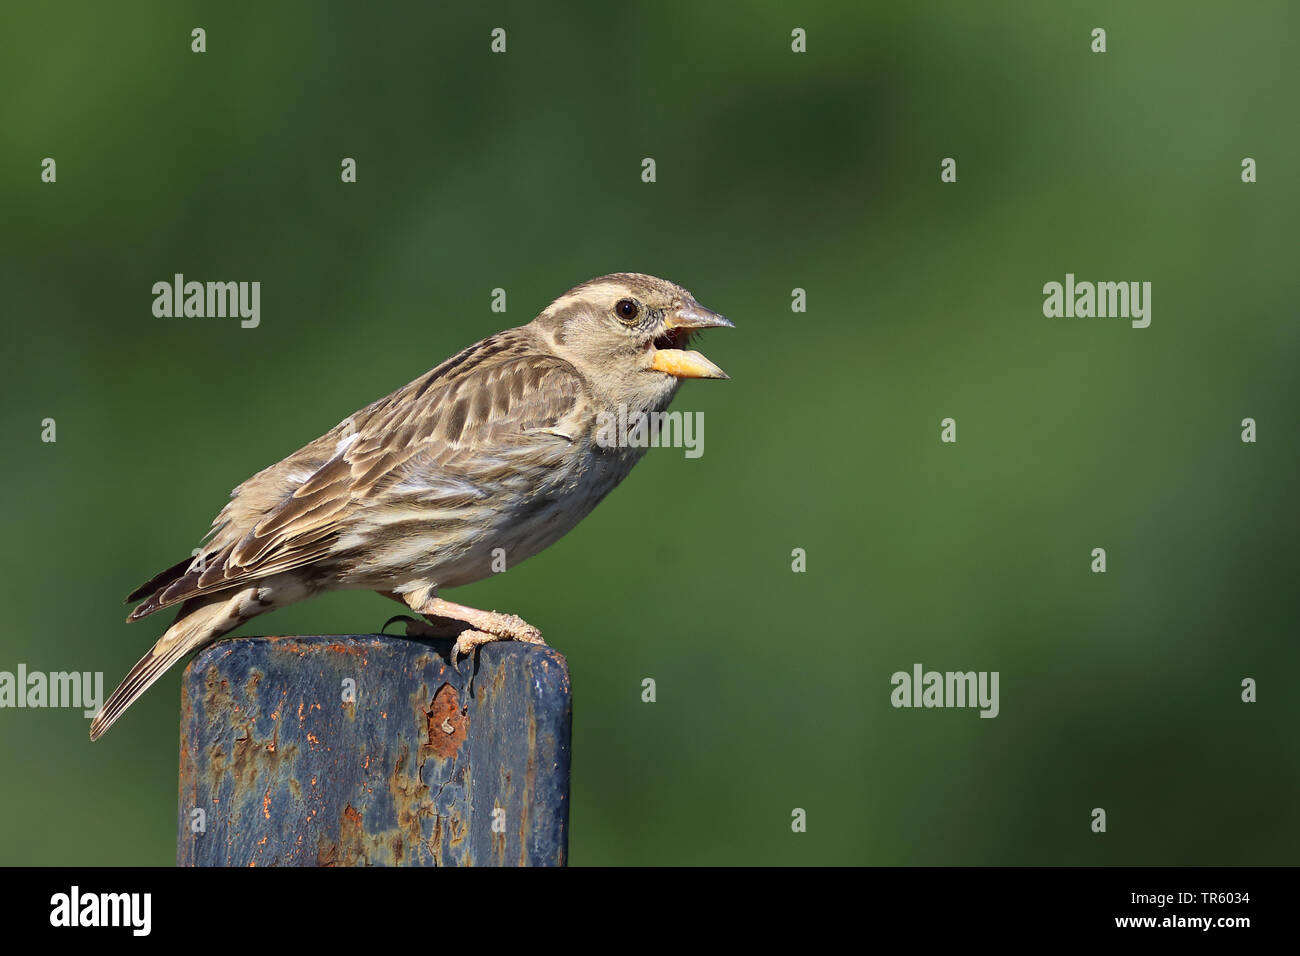 rock sparrow (Passer petronia, Petronia petronia), sitting on a rusty post and singing, side view, Spain, Pozan de Vero Stock Photo